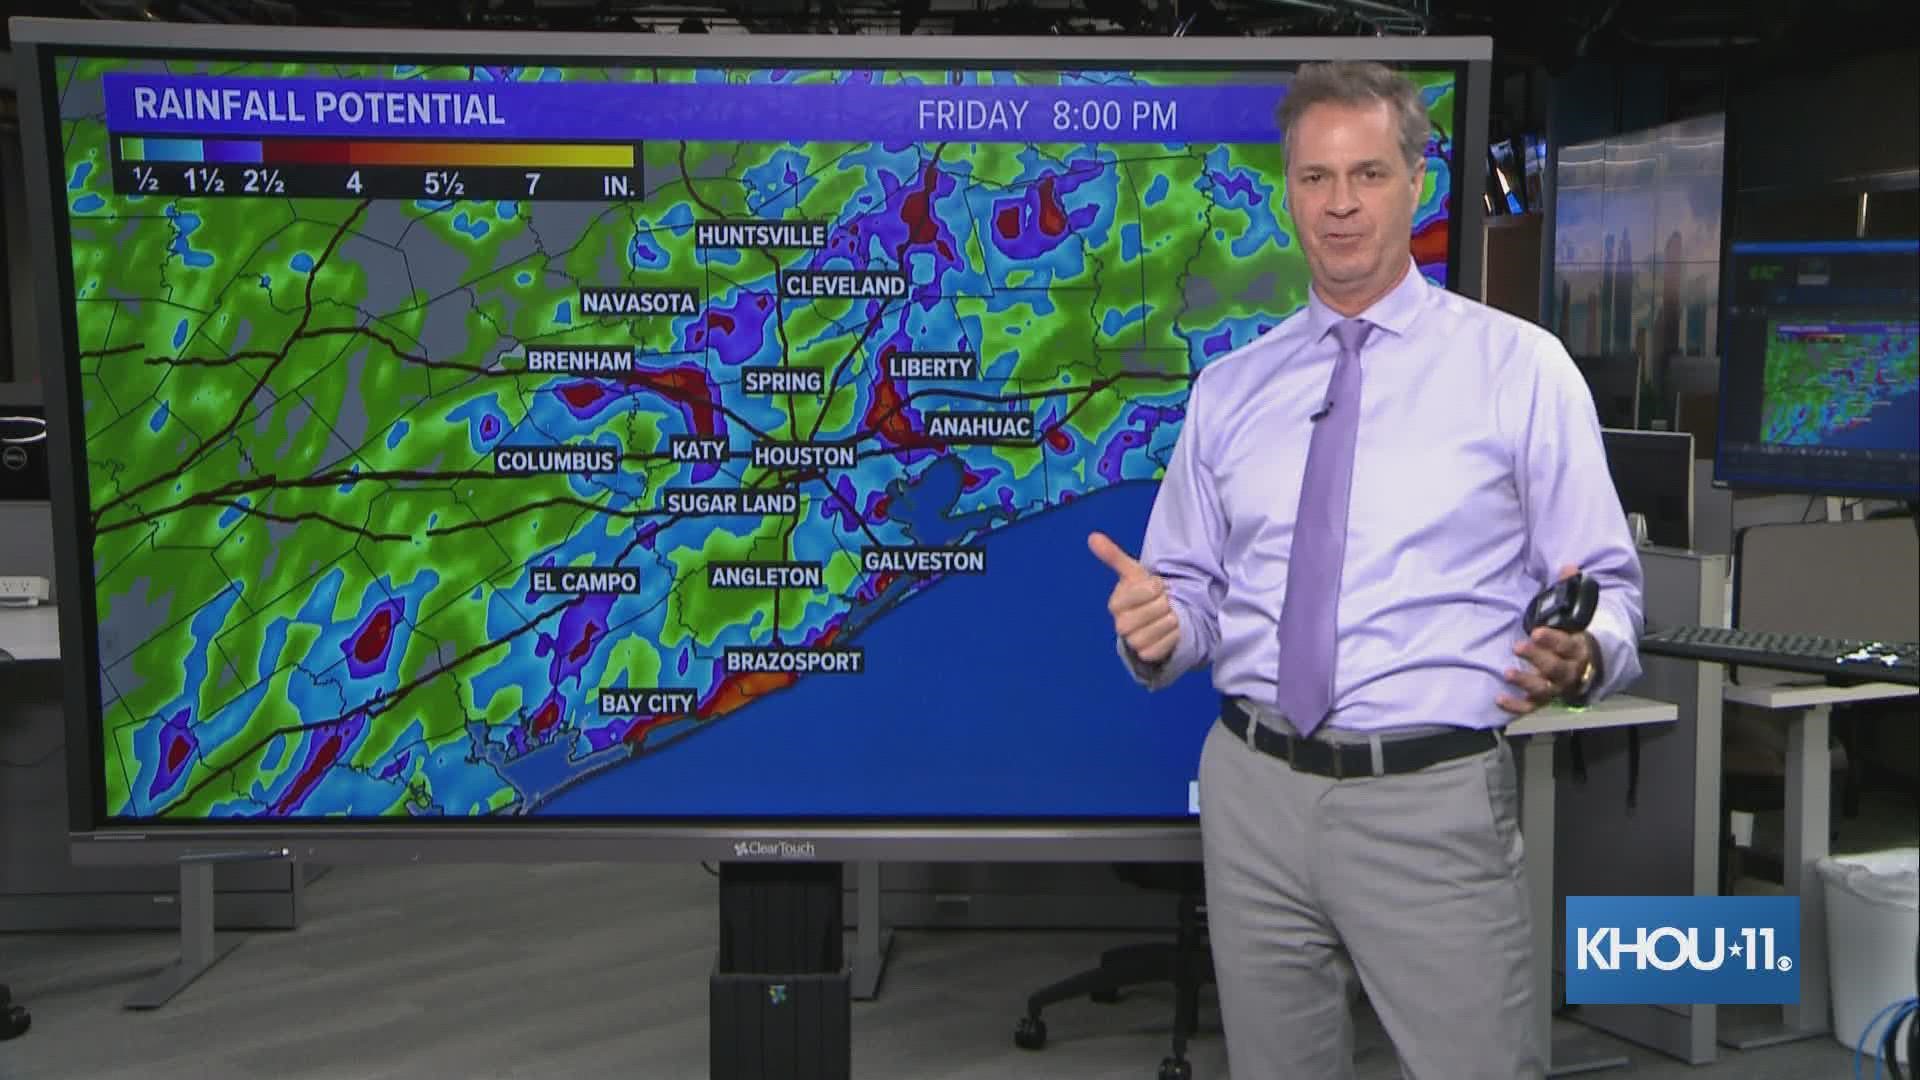 KHOU 11 Chief Meteorologist David Paul gave an update on storms expected in the Houston area Wednesday night.